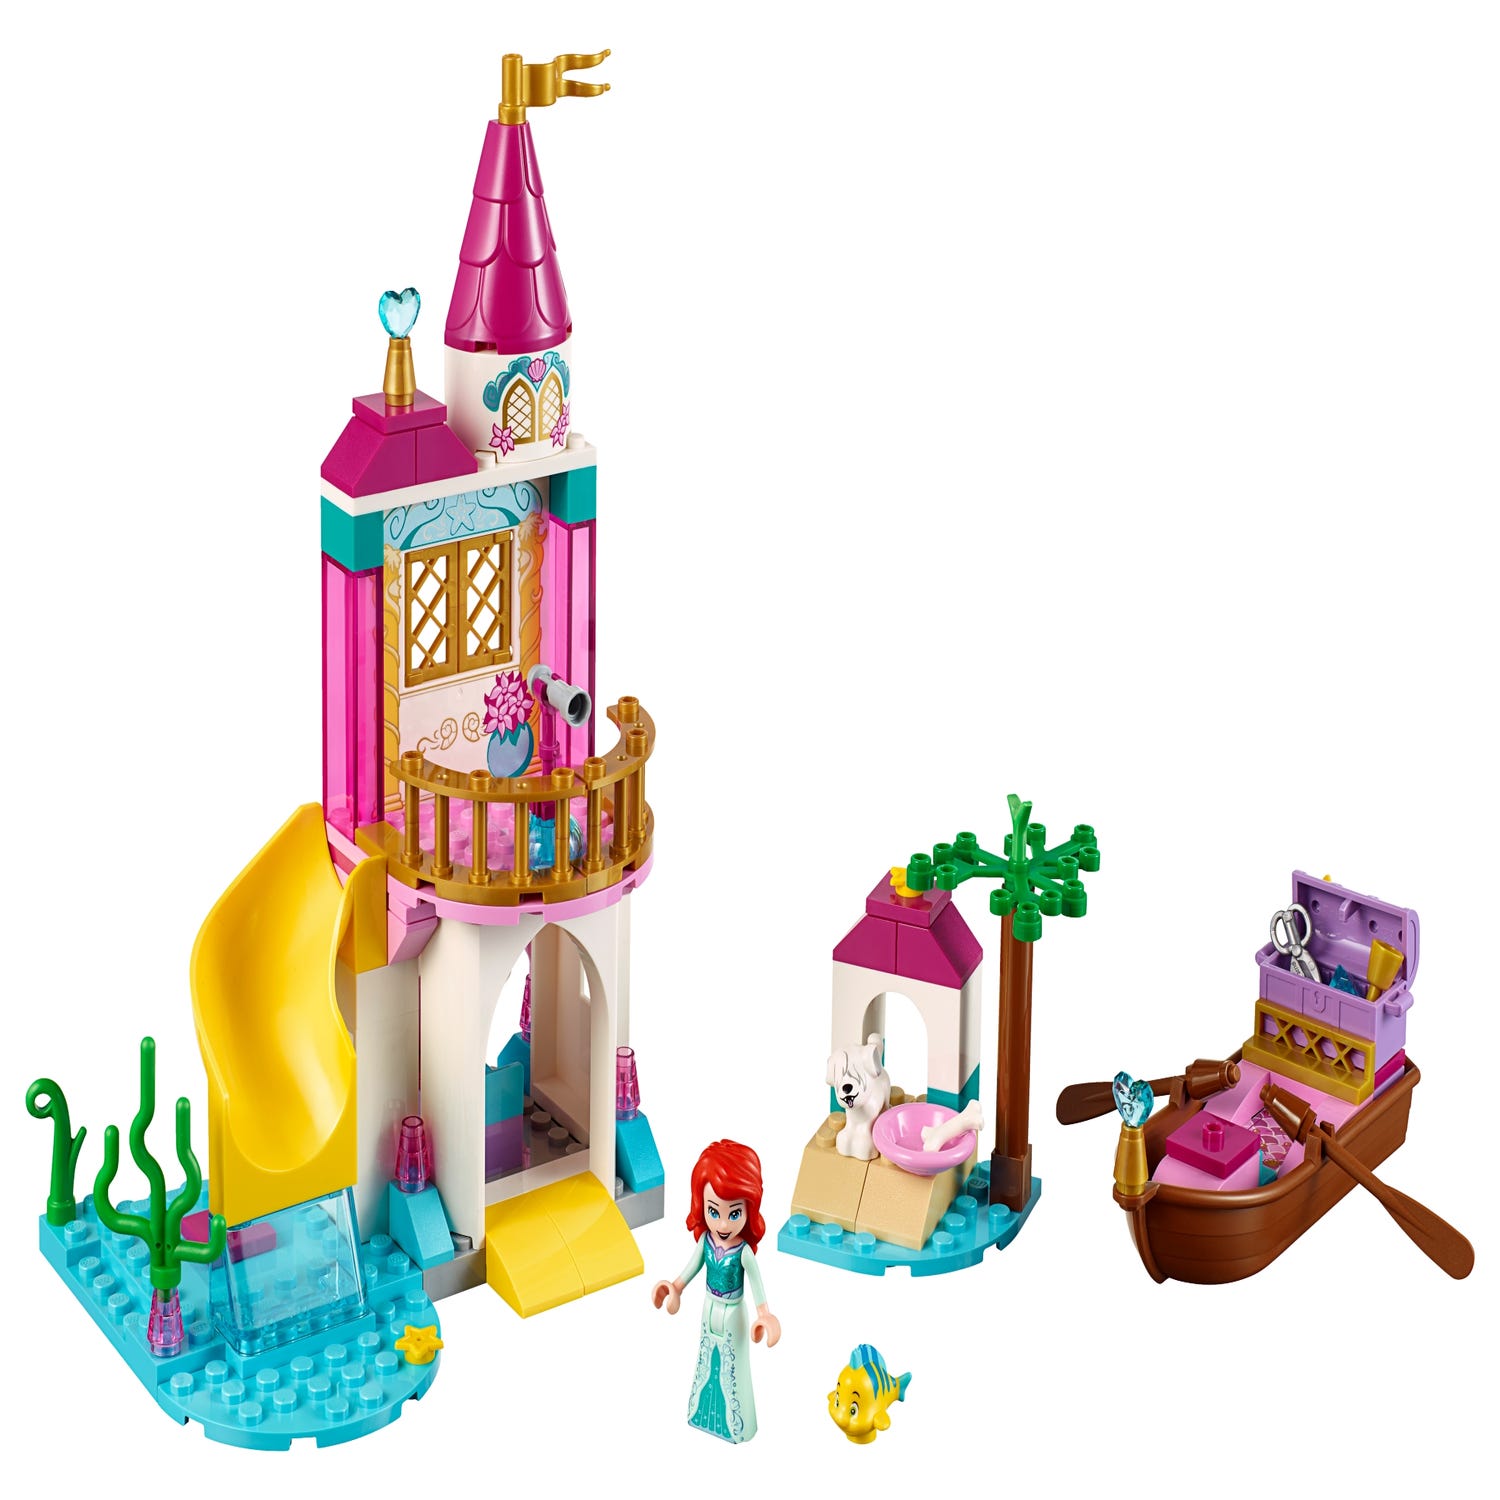 Seaside 41160 | | Buy online at the Official LEGO® Shop US